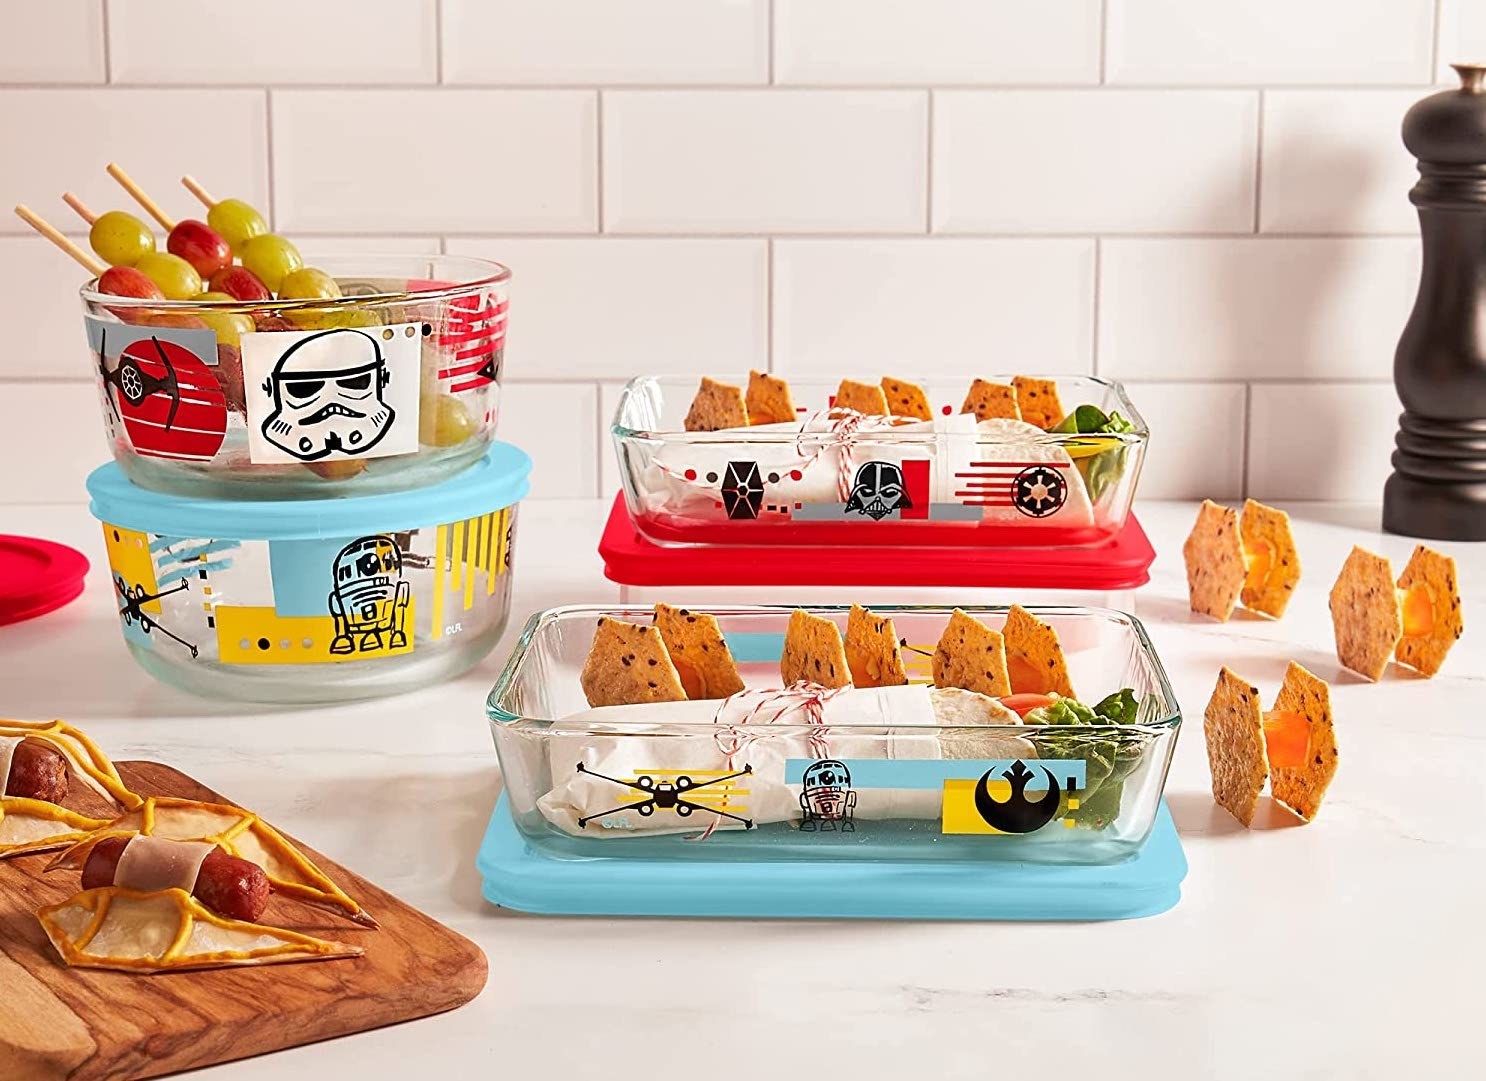 the Pyrex set with Star Wars designs on it